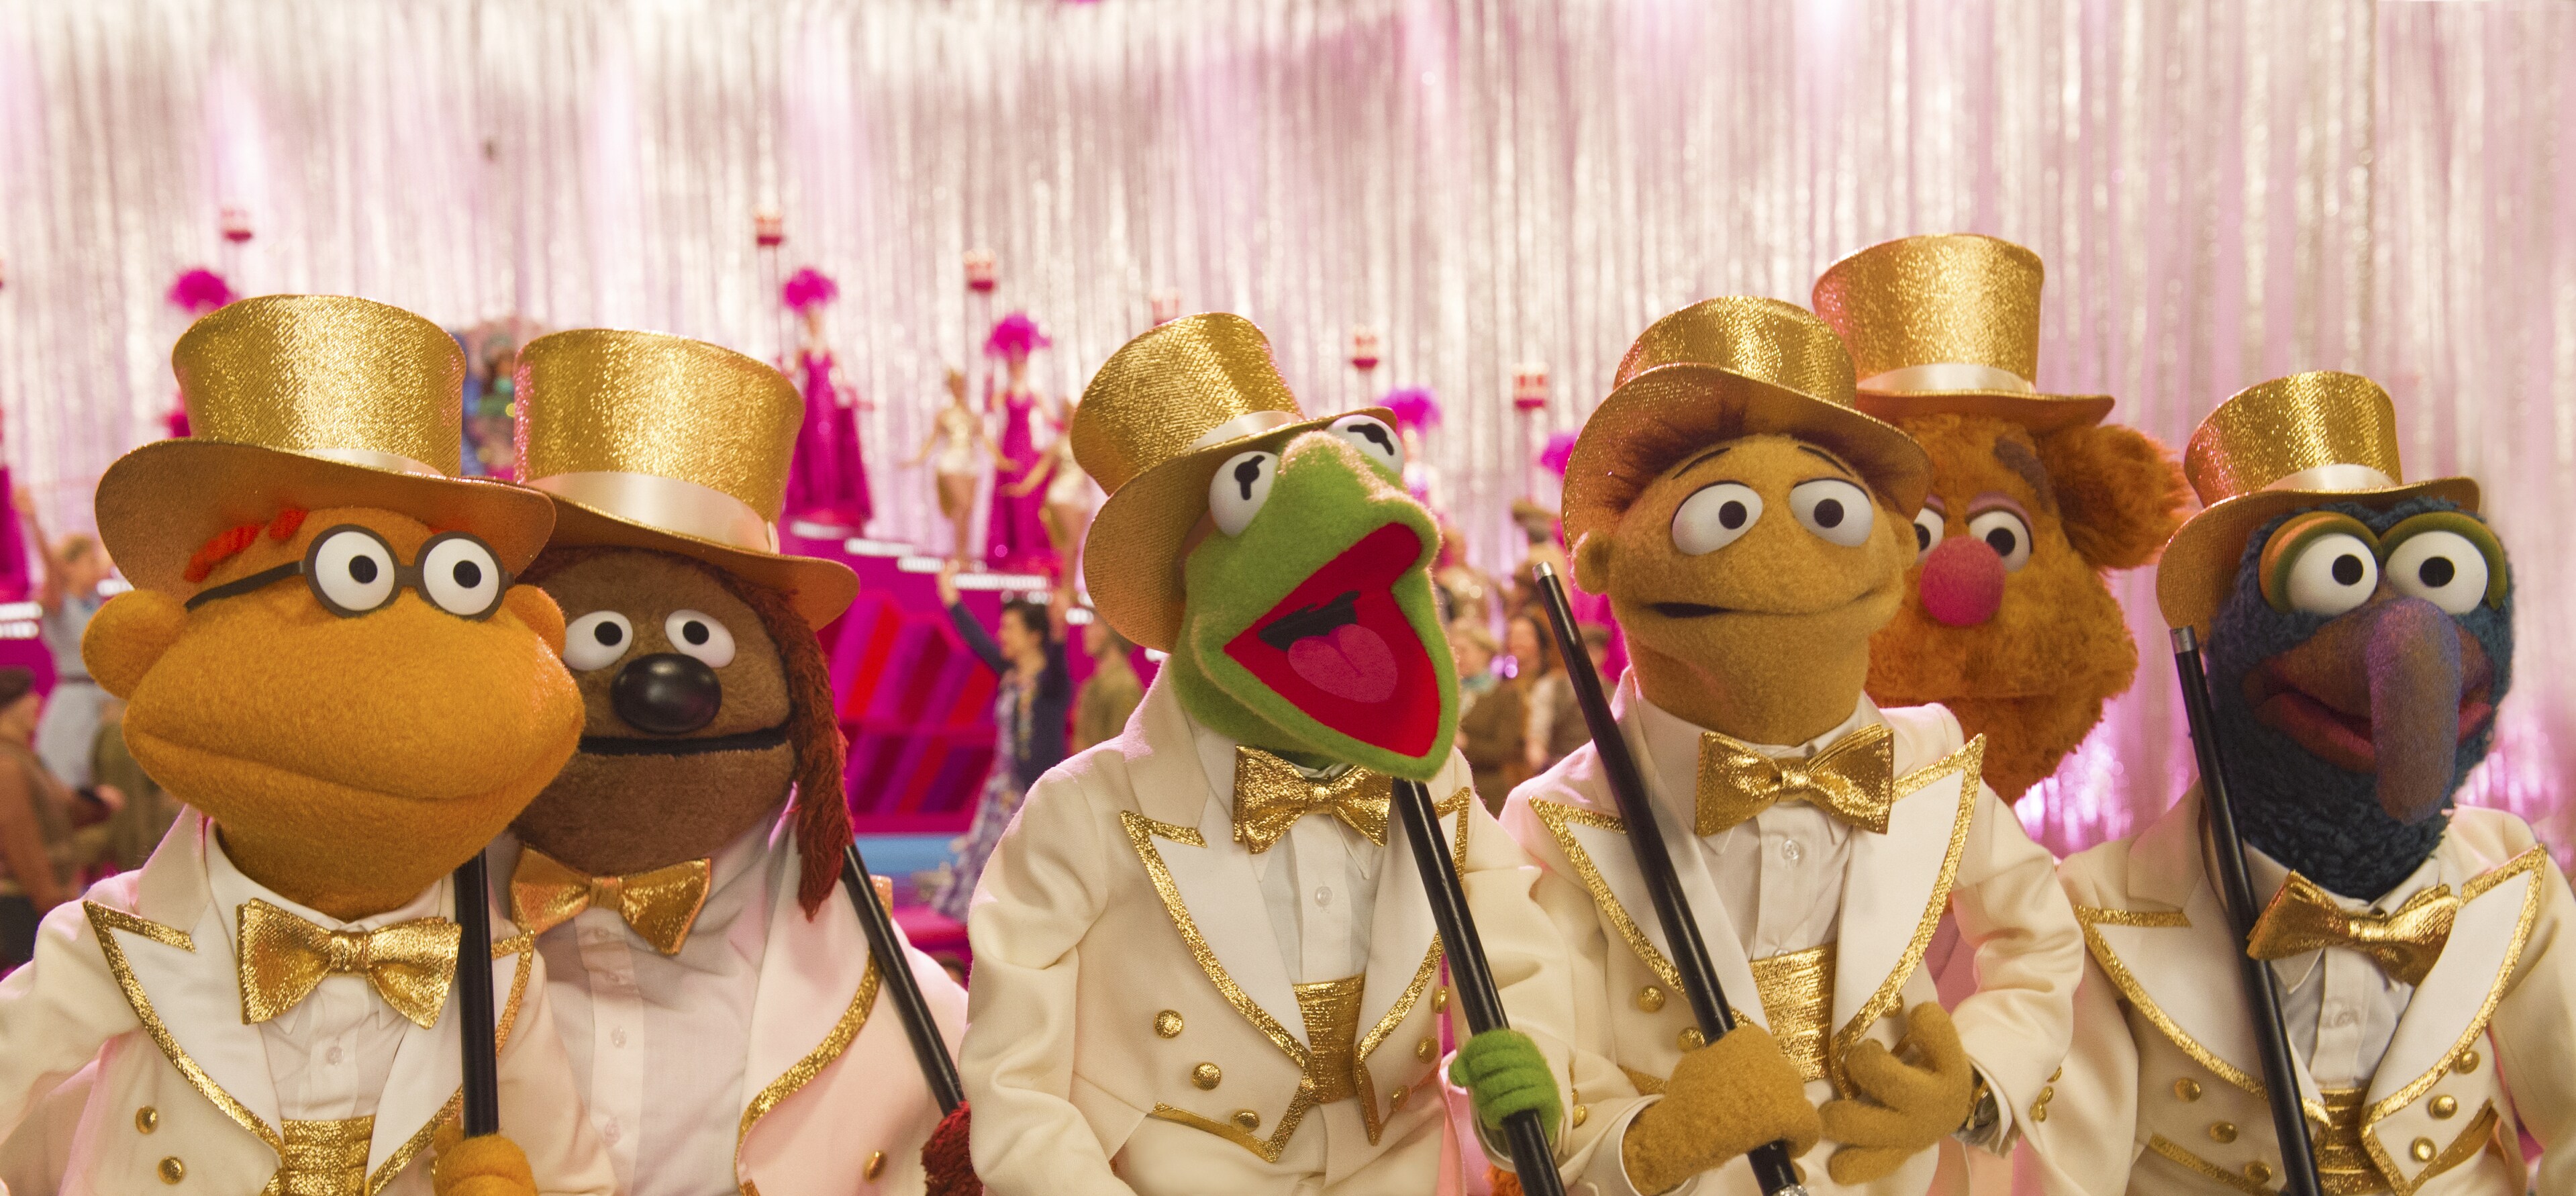 Kermit and the Muppets can light up any stage.